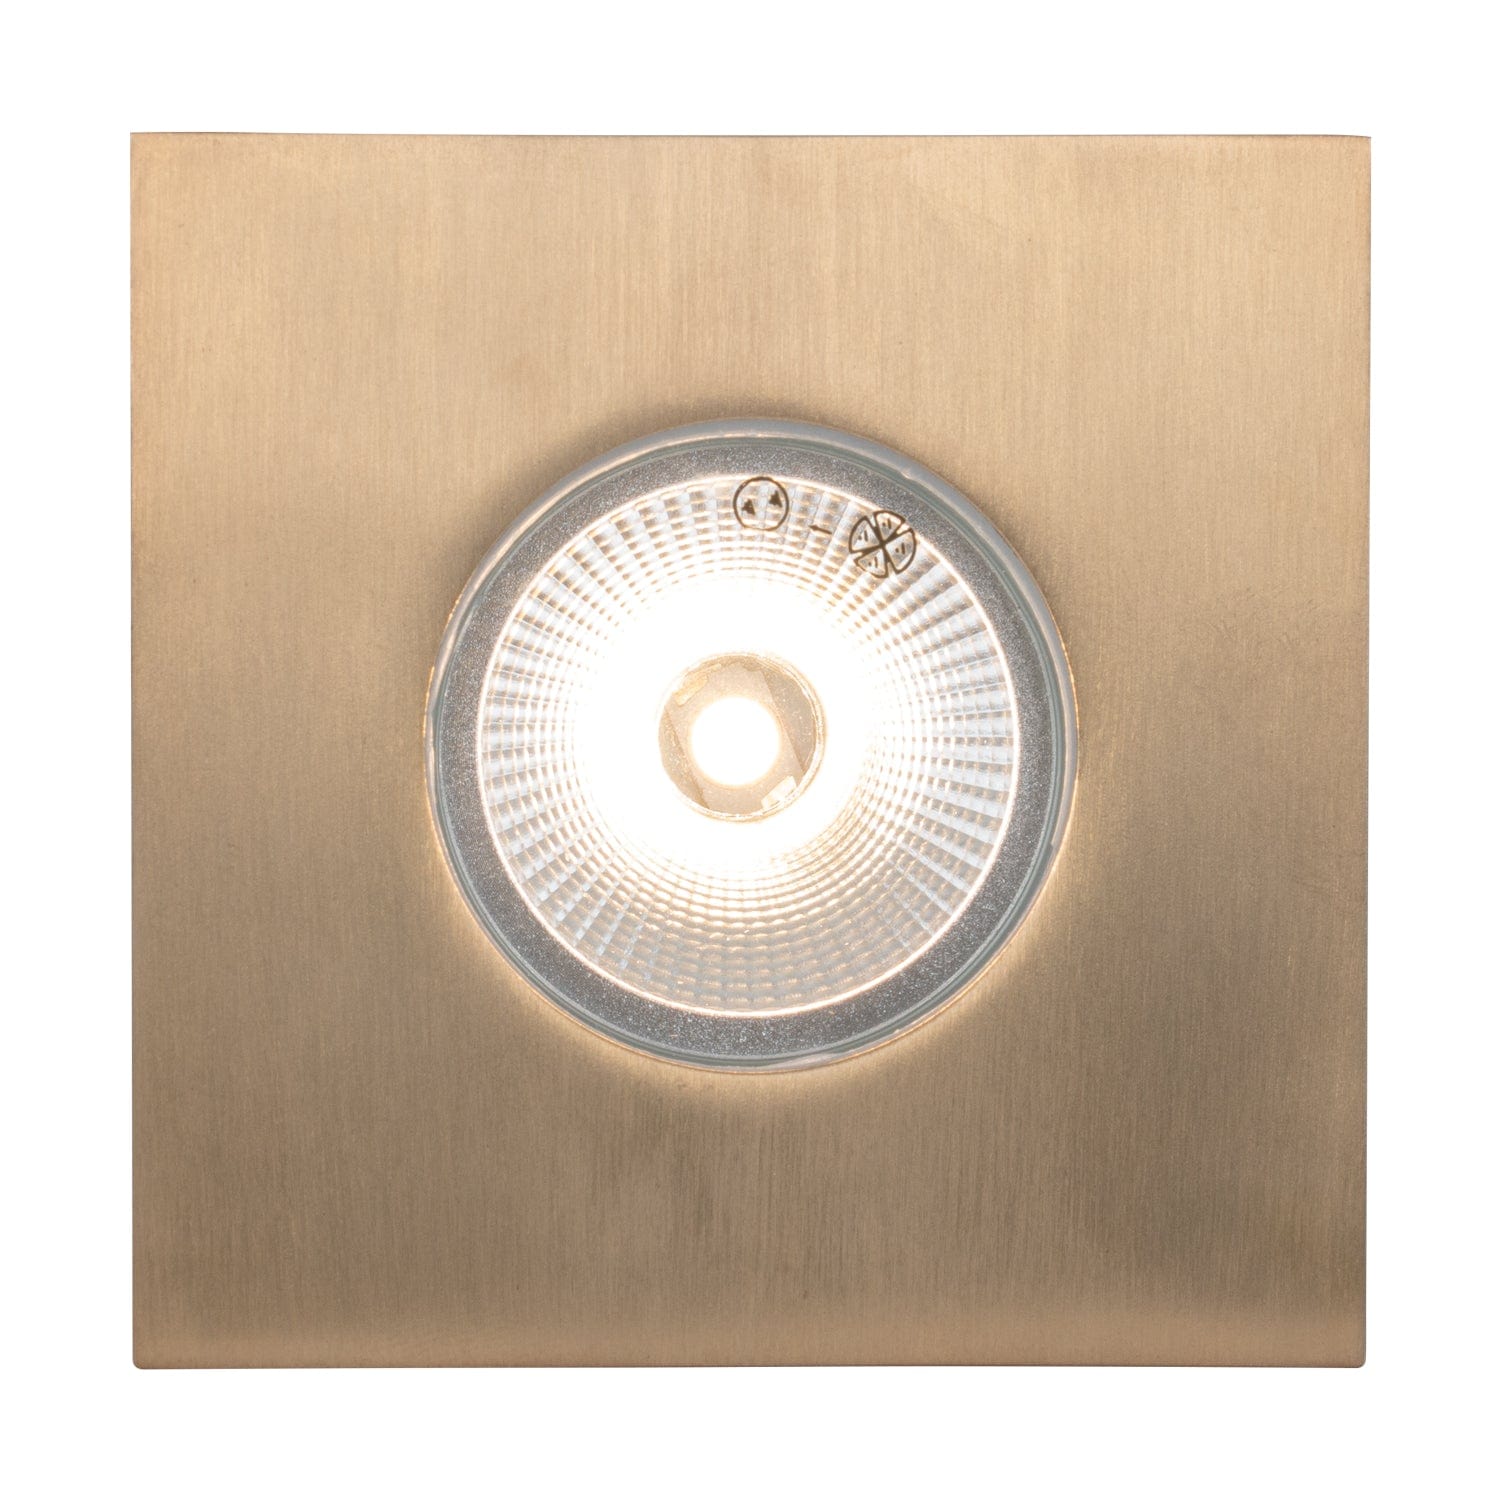 Domus Lighting Step Lights Brass / Square DEKA-COVER Eyelid Round & Square Cover Lights-For-You 19440